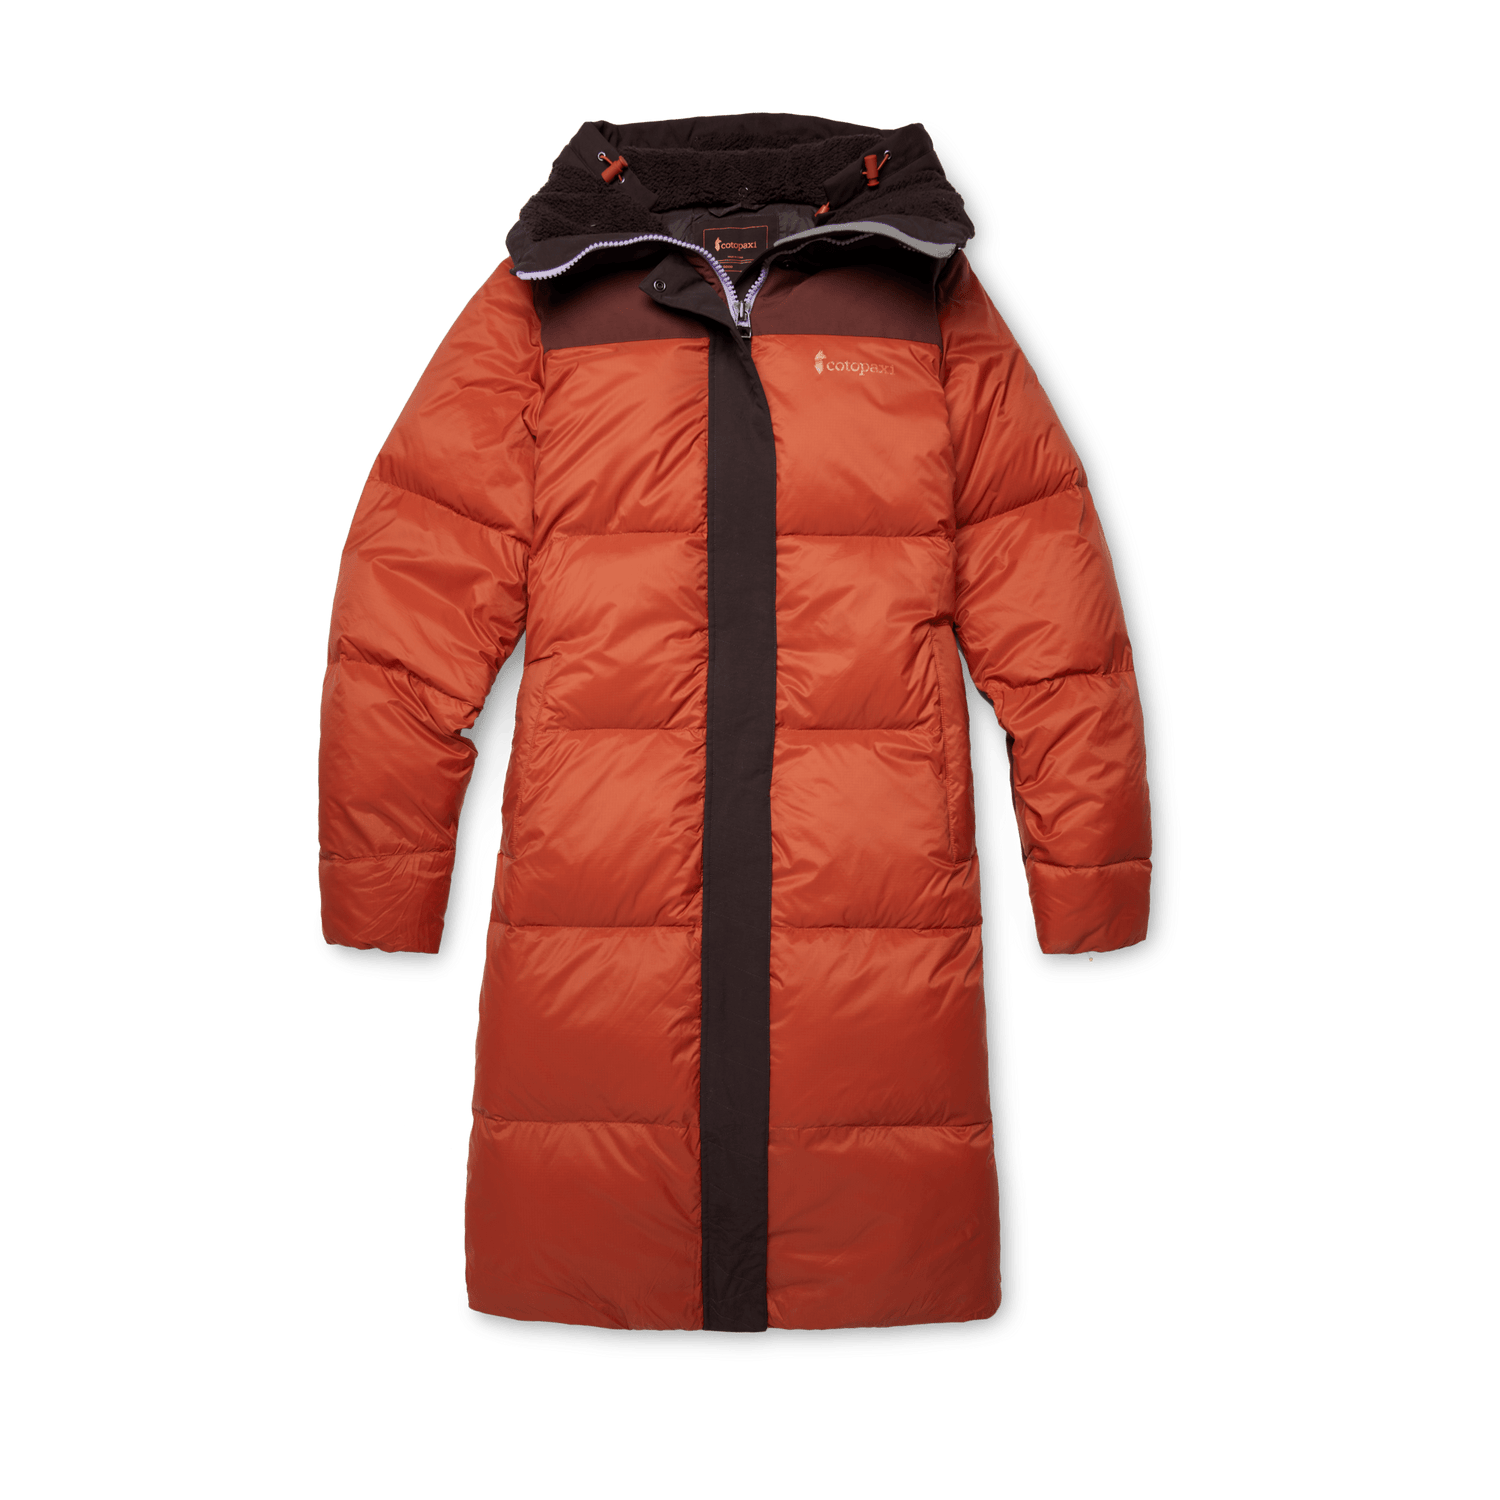 Cotopaxi W's Solazo Down Parka - Responsibly sourced down Cavern & Spice Jacket